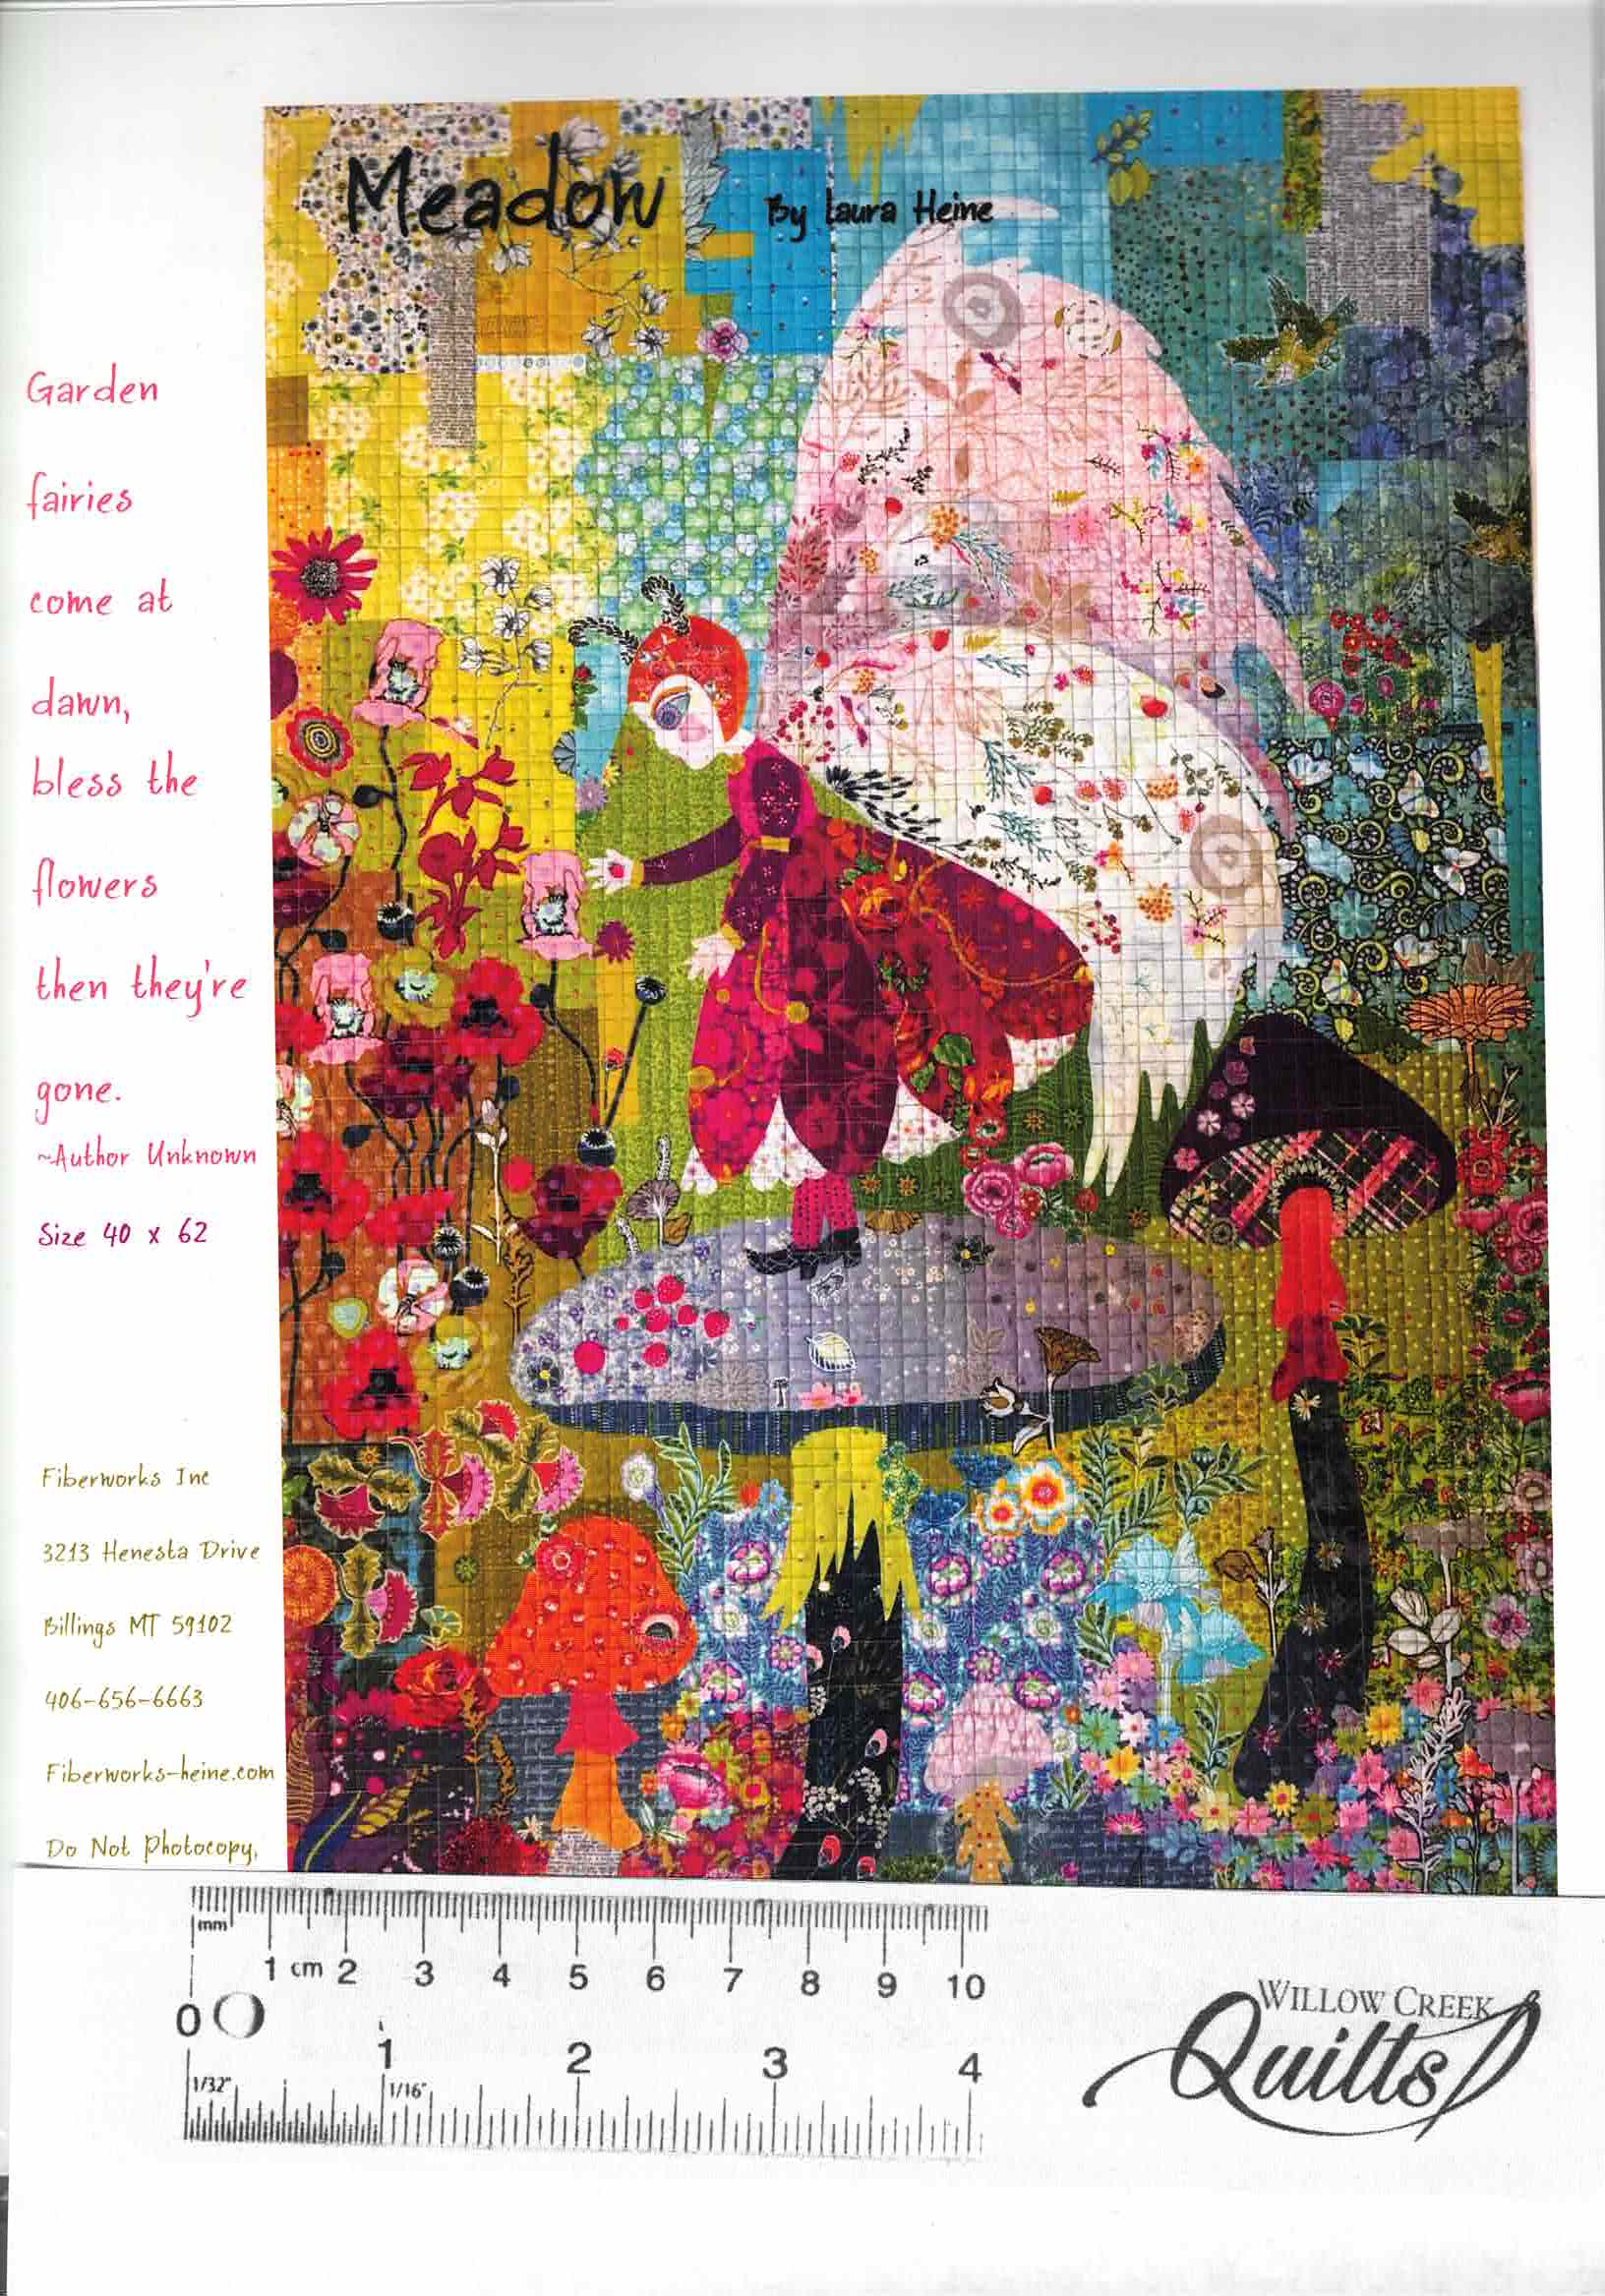 Meadow Fairy Collage pattern - by Laura Heine